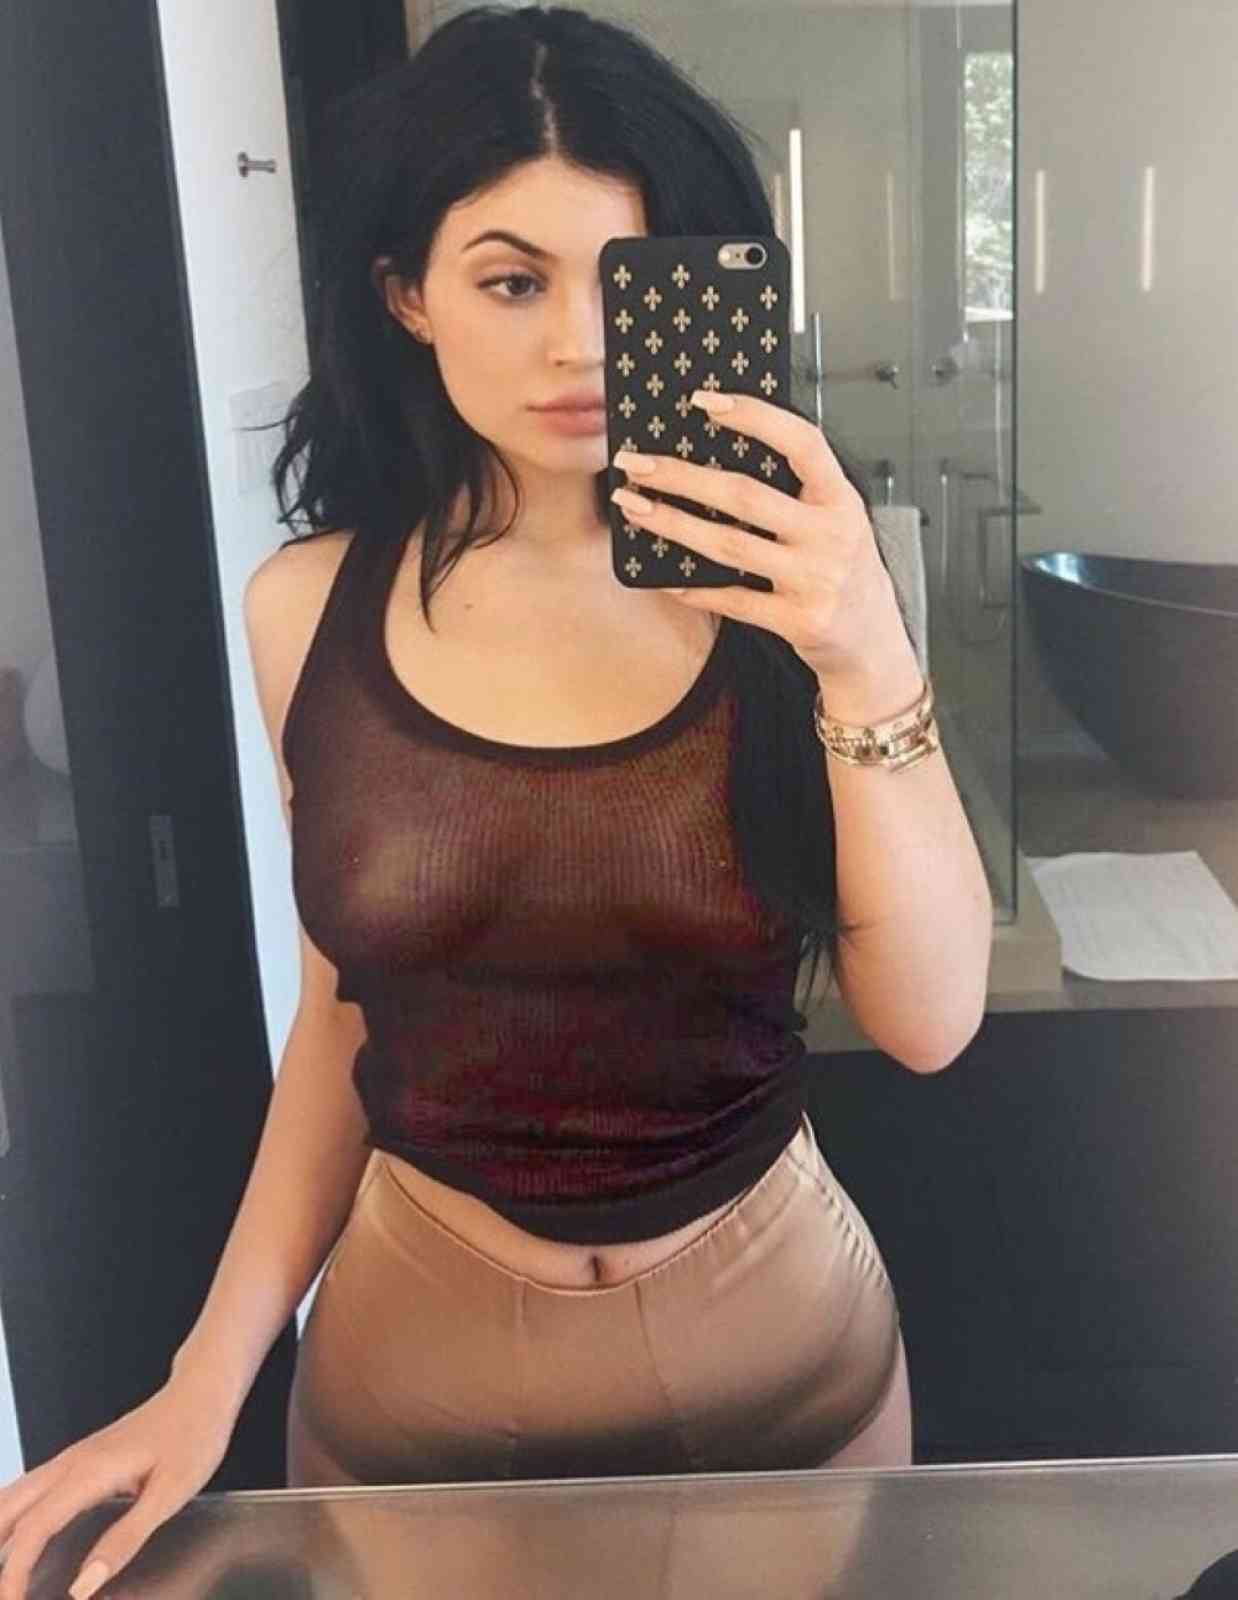 Kylie Jenner showing boobs